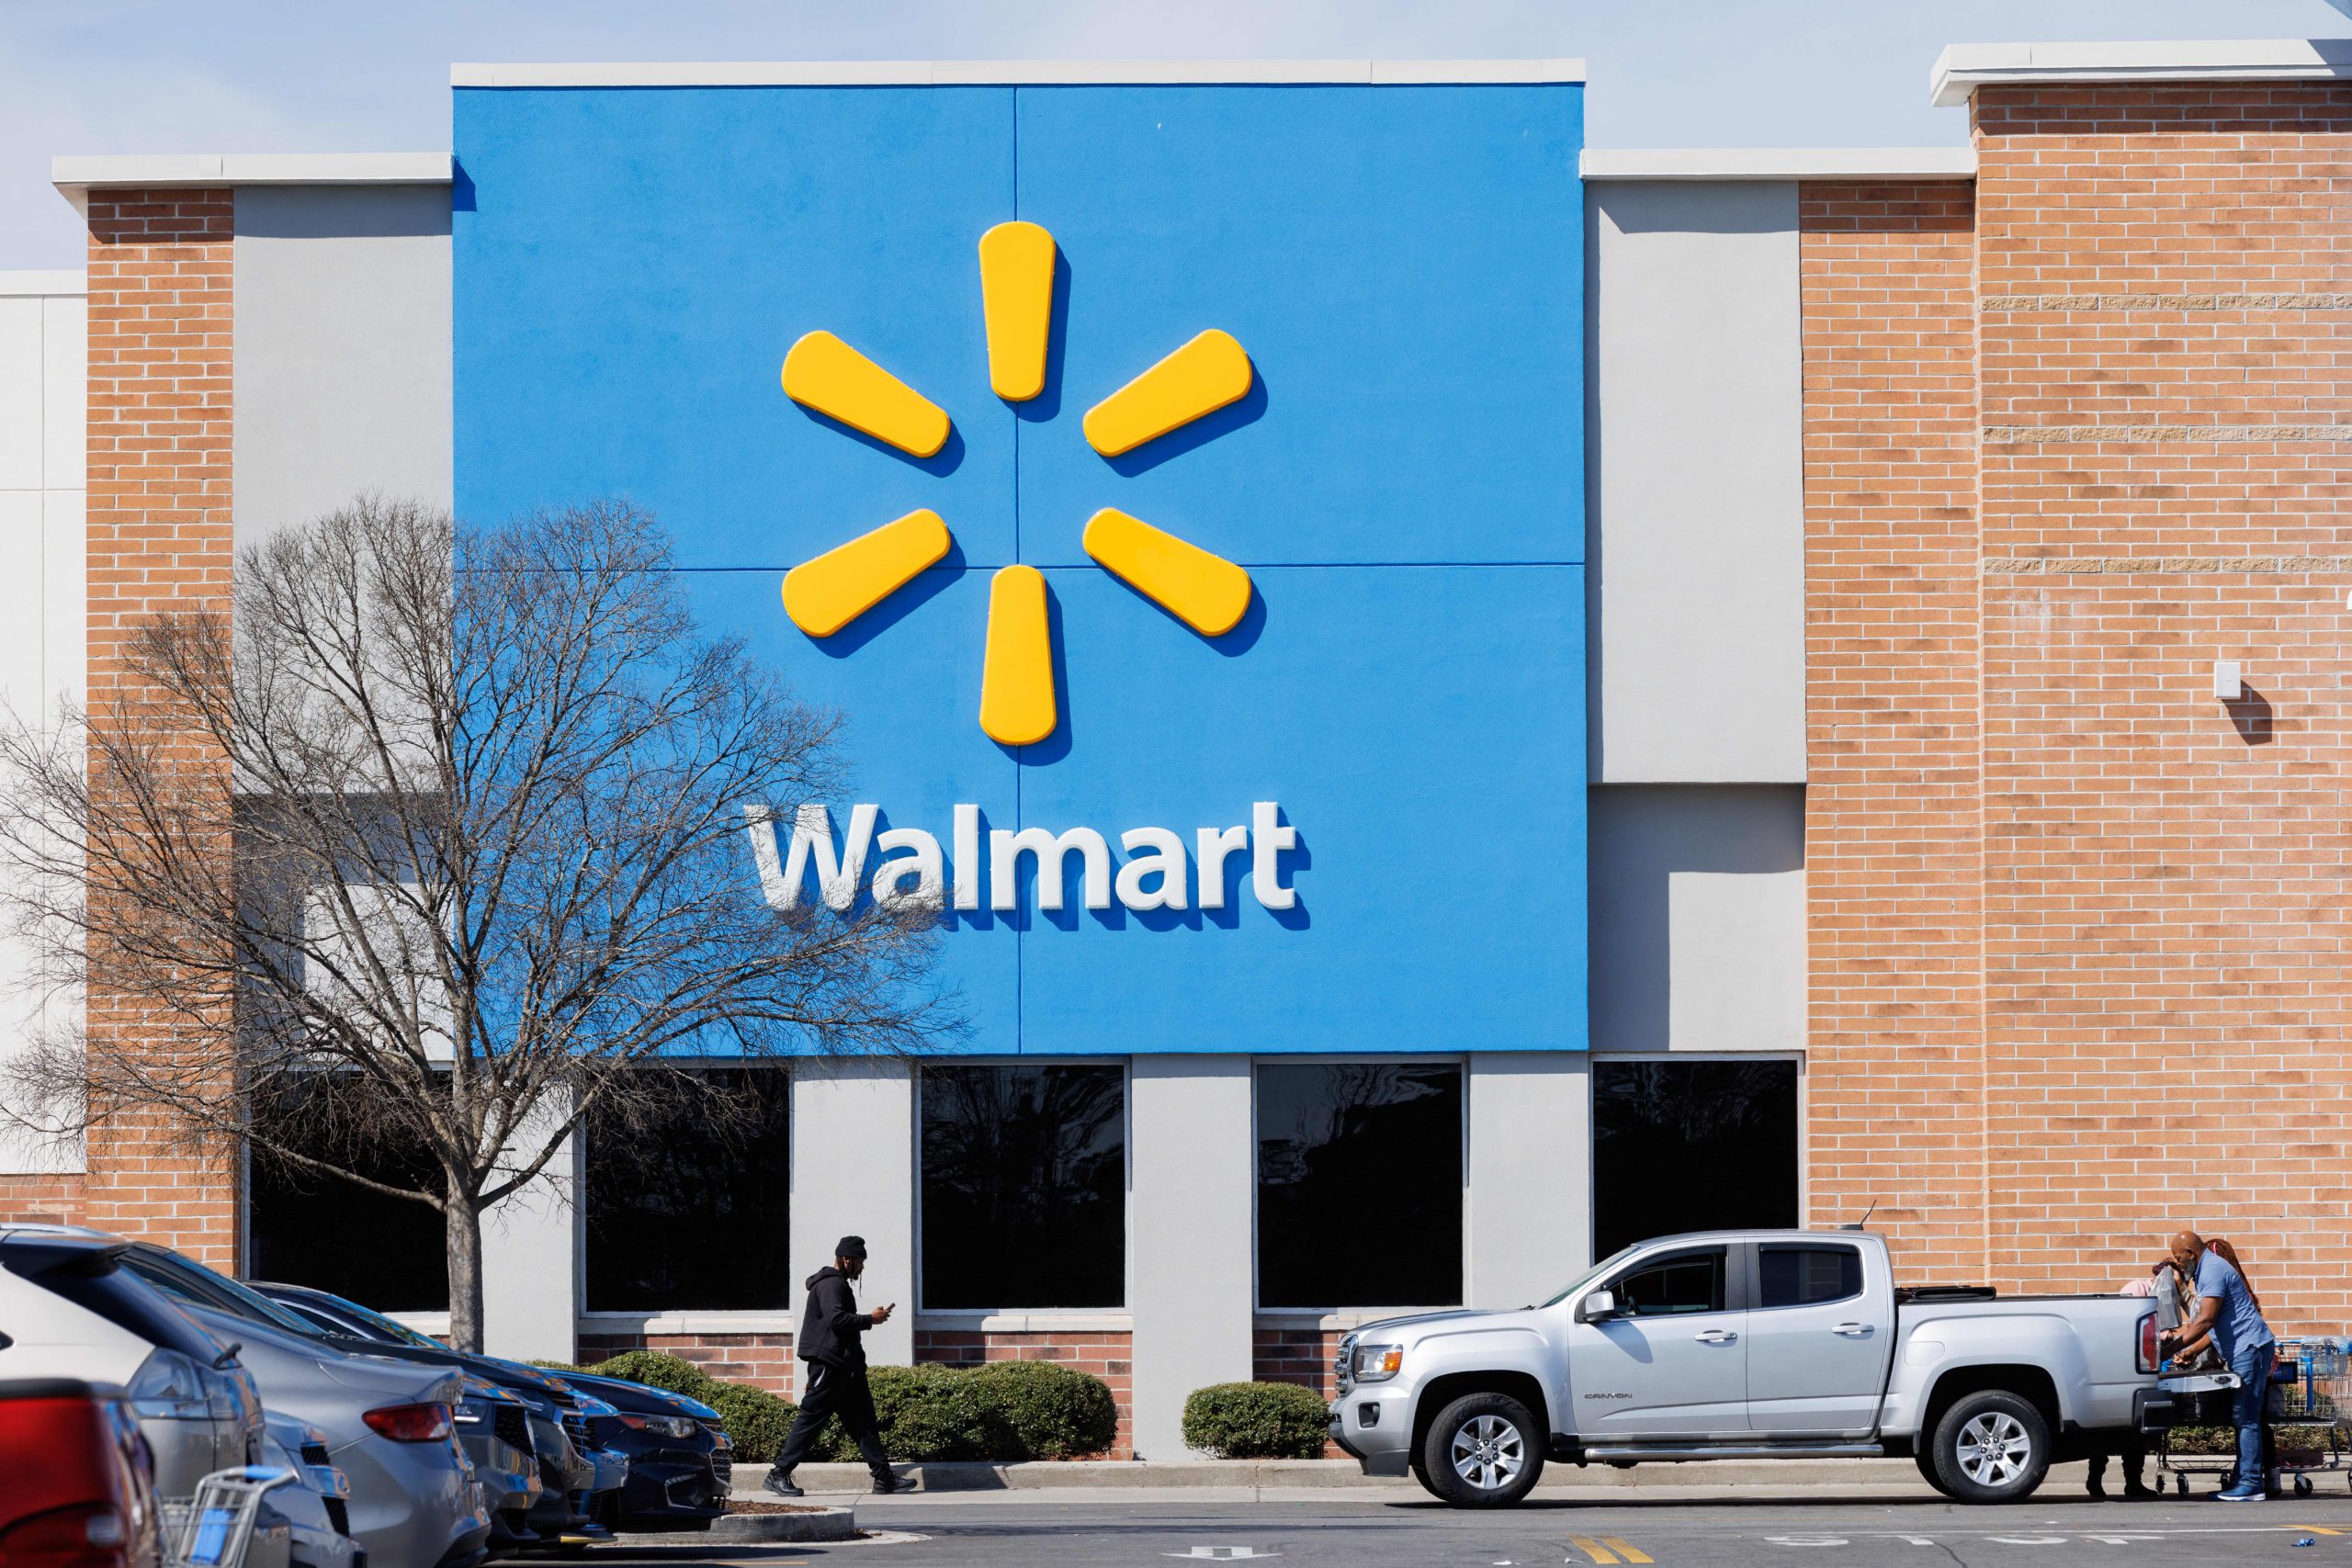 Walmart shows a preference for imports from India over China, according to data